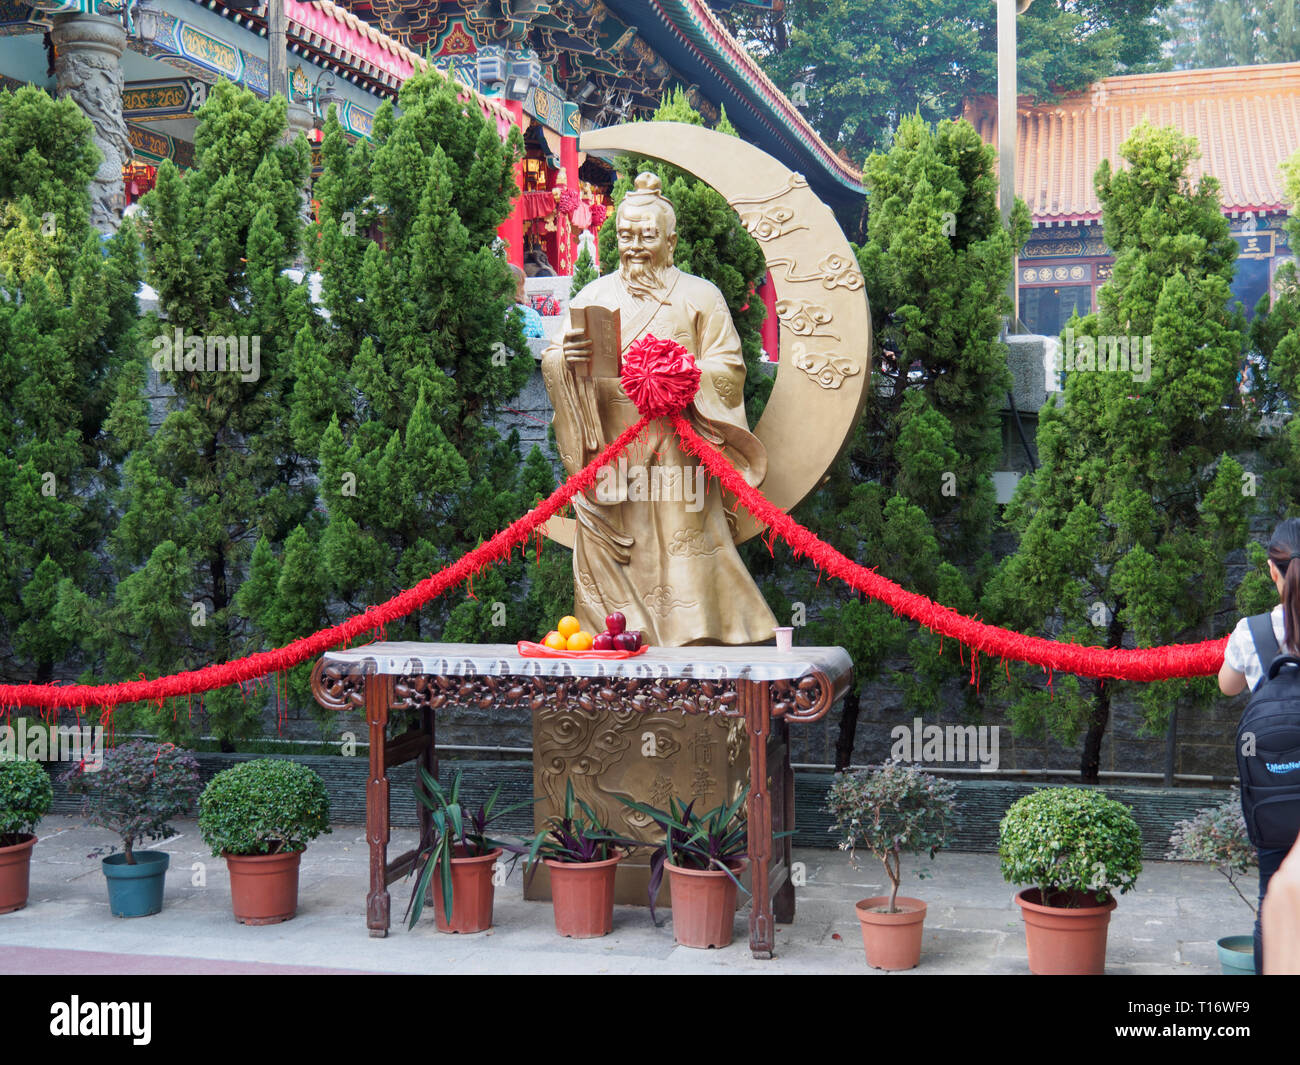 Kowloon, Hong Kong - November 03, 2017: An image of Yue Lao the god of marriage and love. The statue can be found in the Wong Tai Sin temple in Hong K Stock Photo